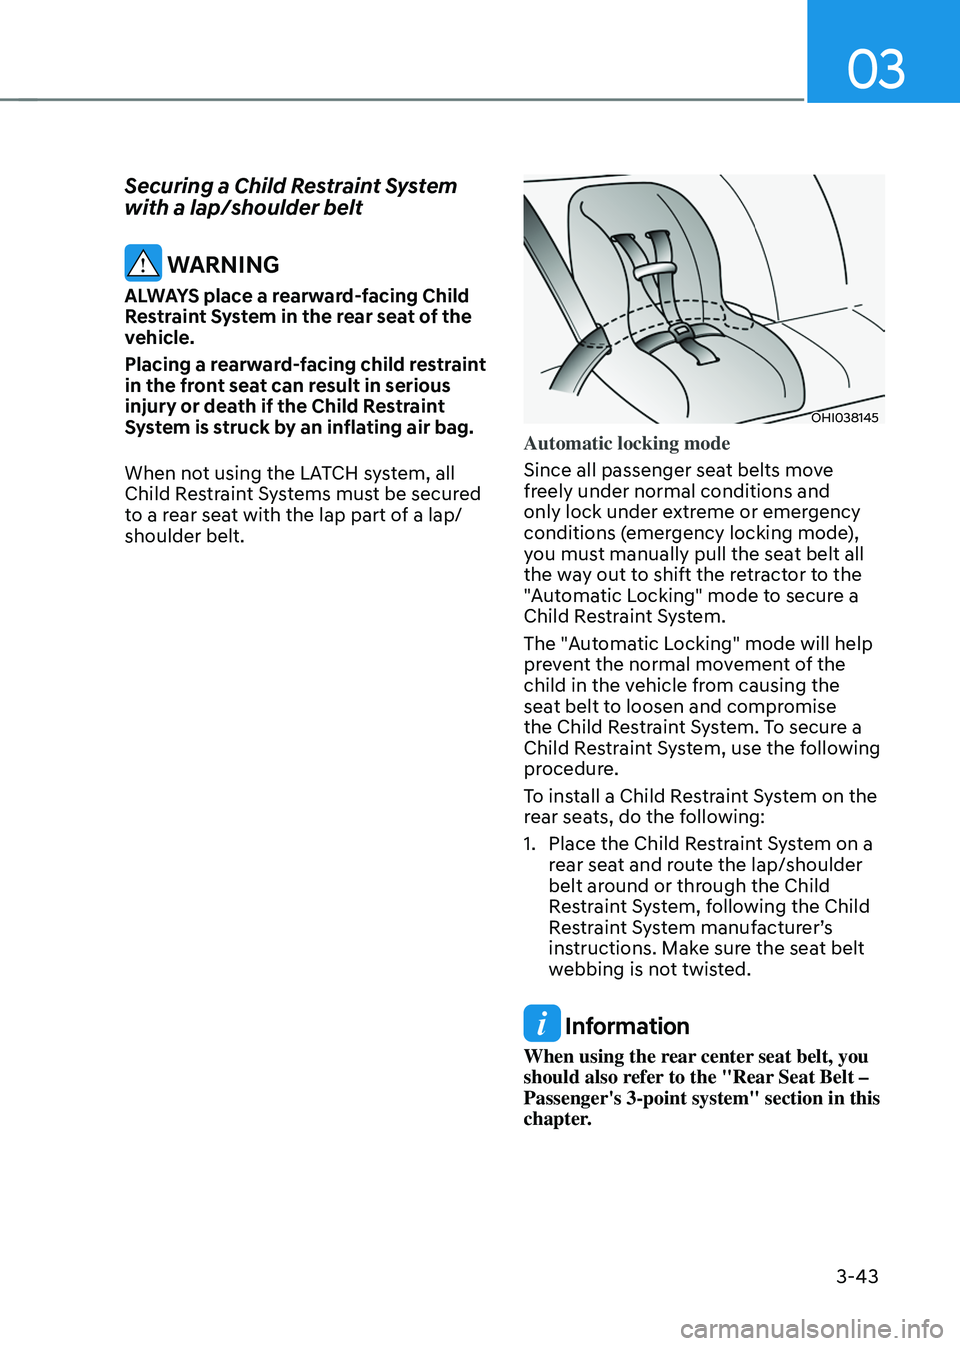 HYUNDAI TUCSON 2022 Owners Guide 03
3-43
Securing a Child Restraint System 
with a lap/shoulder belt
 WARNING
ALWAYS place a rearward-facing Child 
Restraint System in the rear seat of the 
vehicle.
Placing a rearward-facing child re